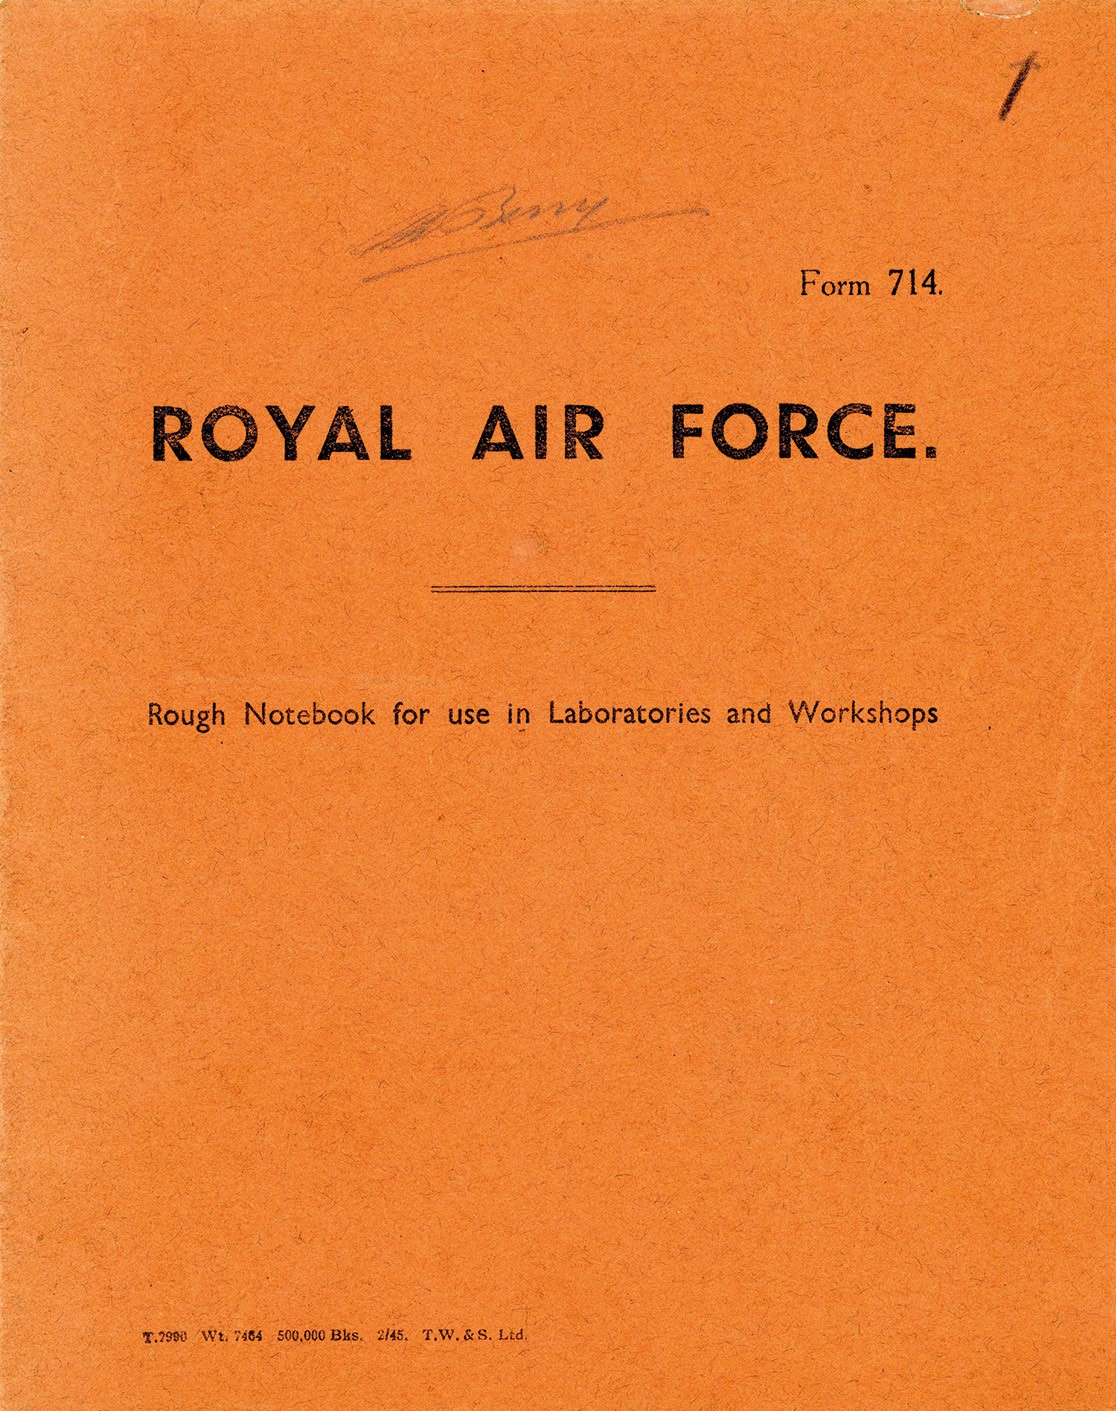 Cover of Dennis Berry's RAF notebook used whilst a student at Leicester School of Architecture, 1946